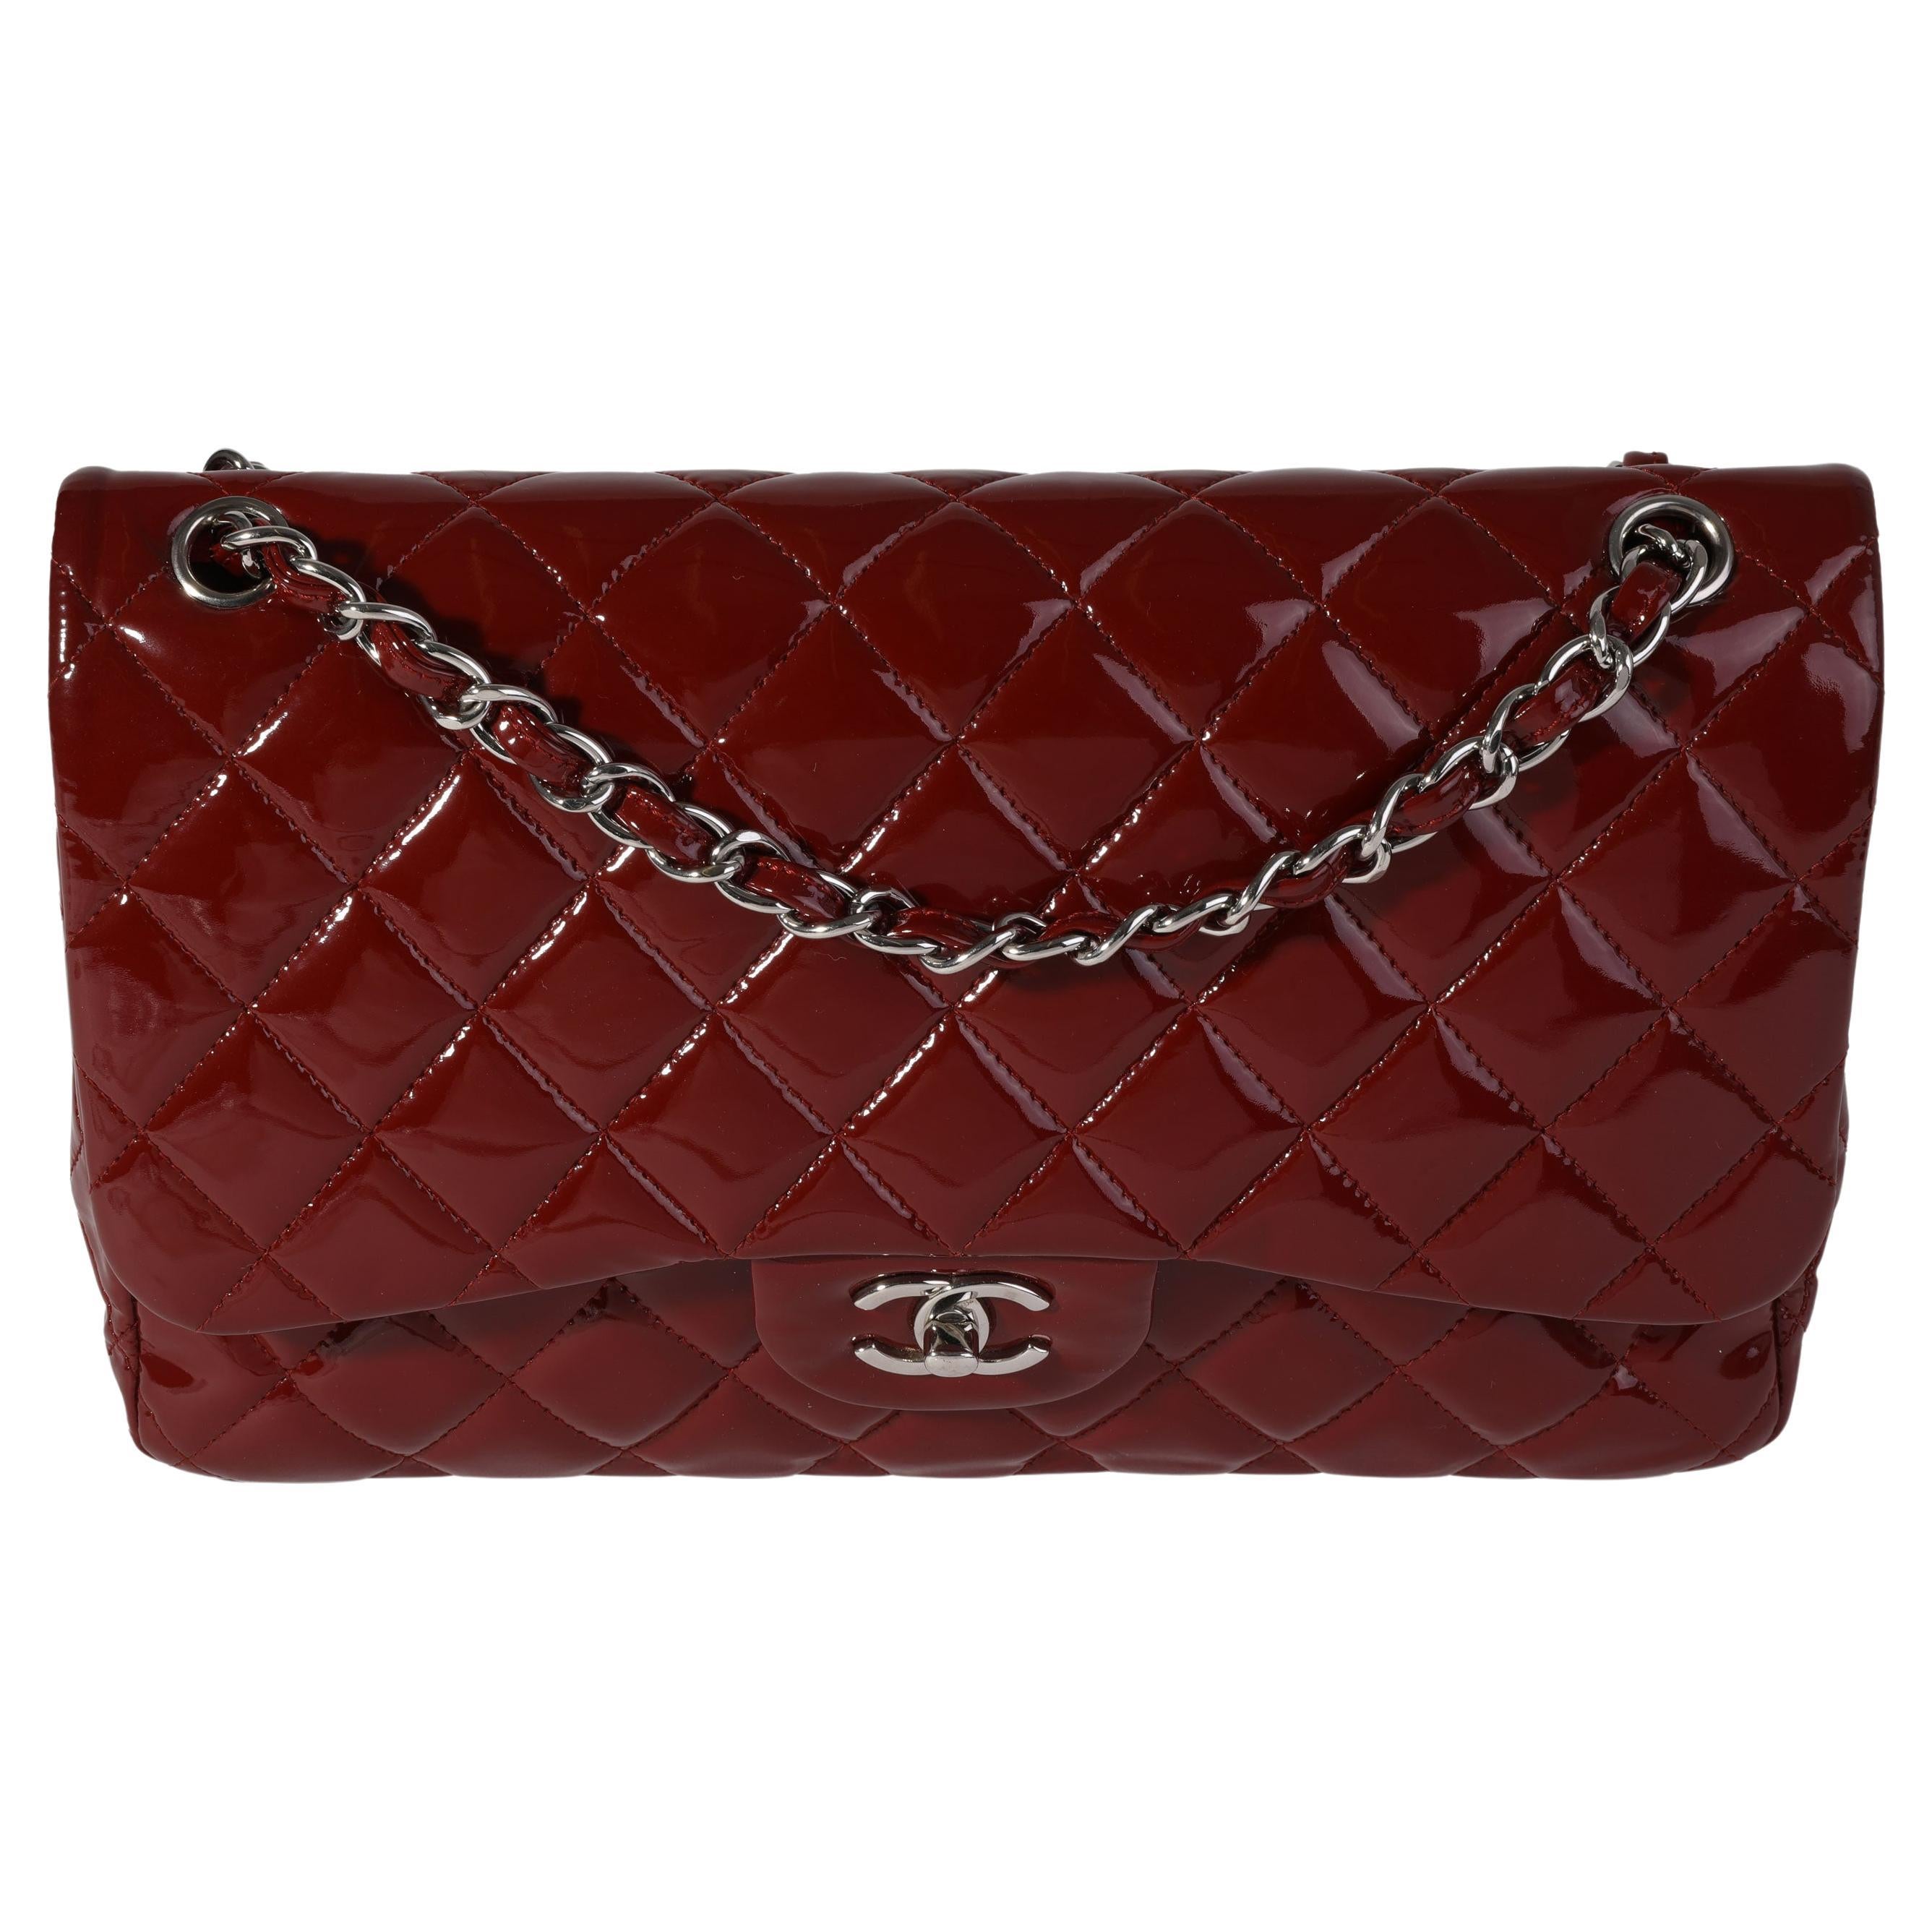 Chanel Vintage Dark Red Lambskin Contrast Piping Tall S